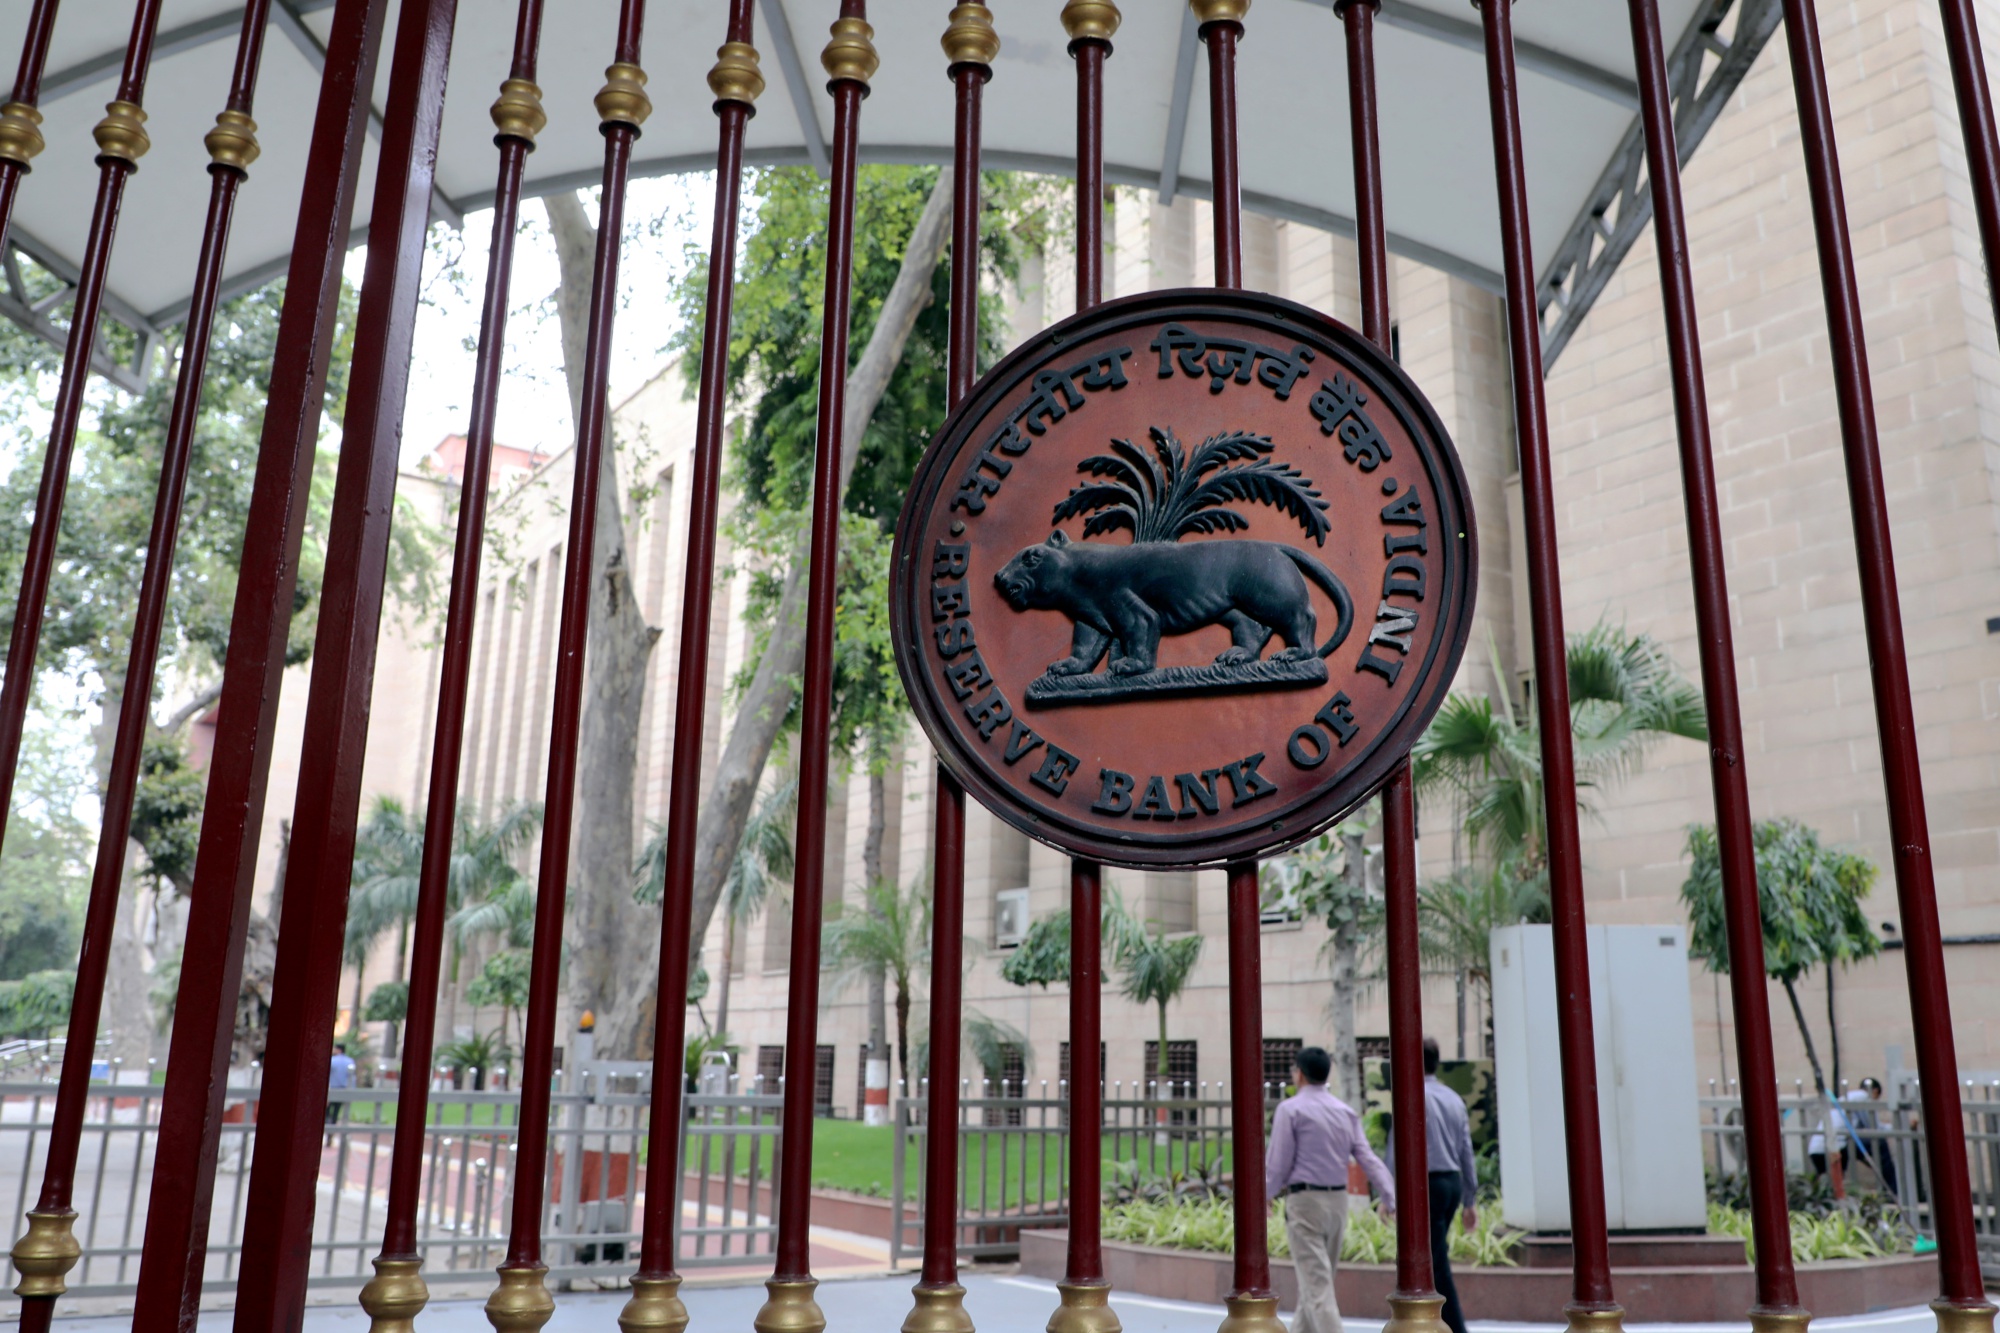 India's RBI Tightens Rules on Digital Lending After Complaints - Bloomberg